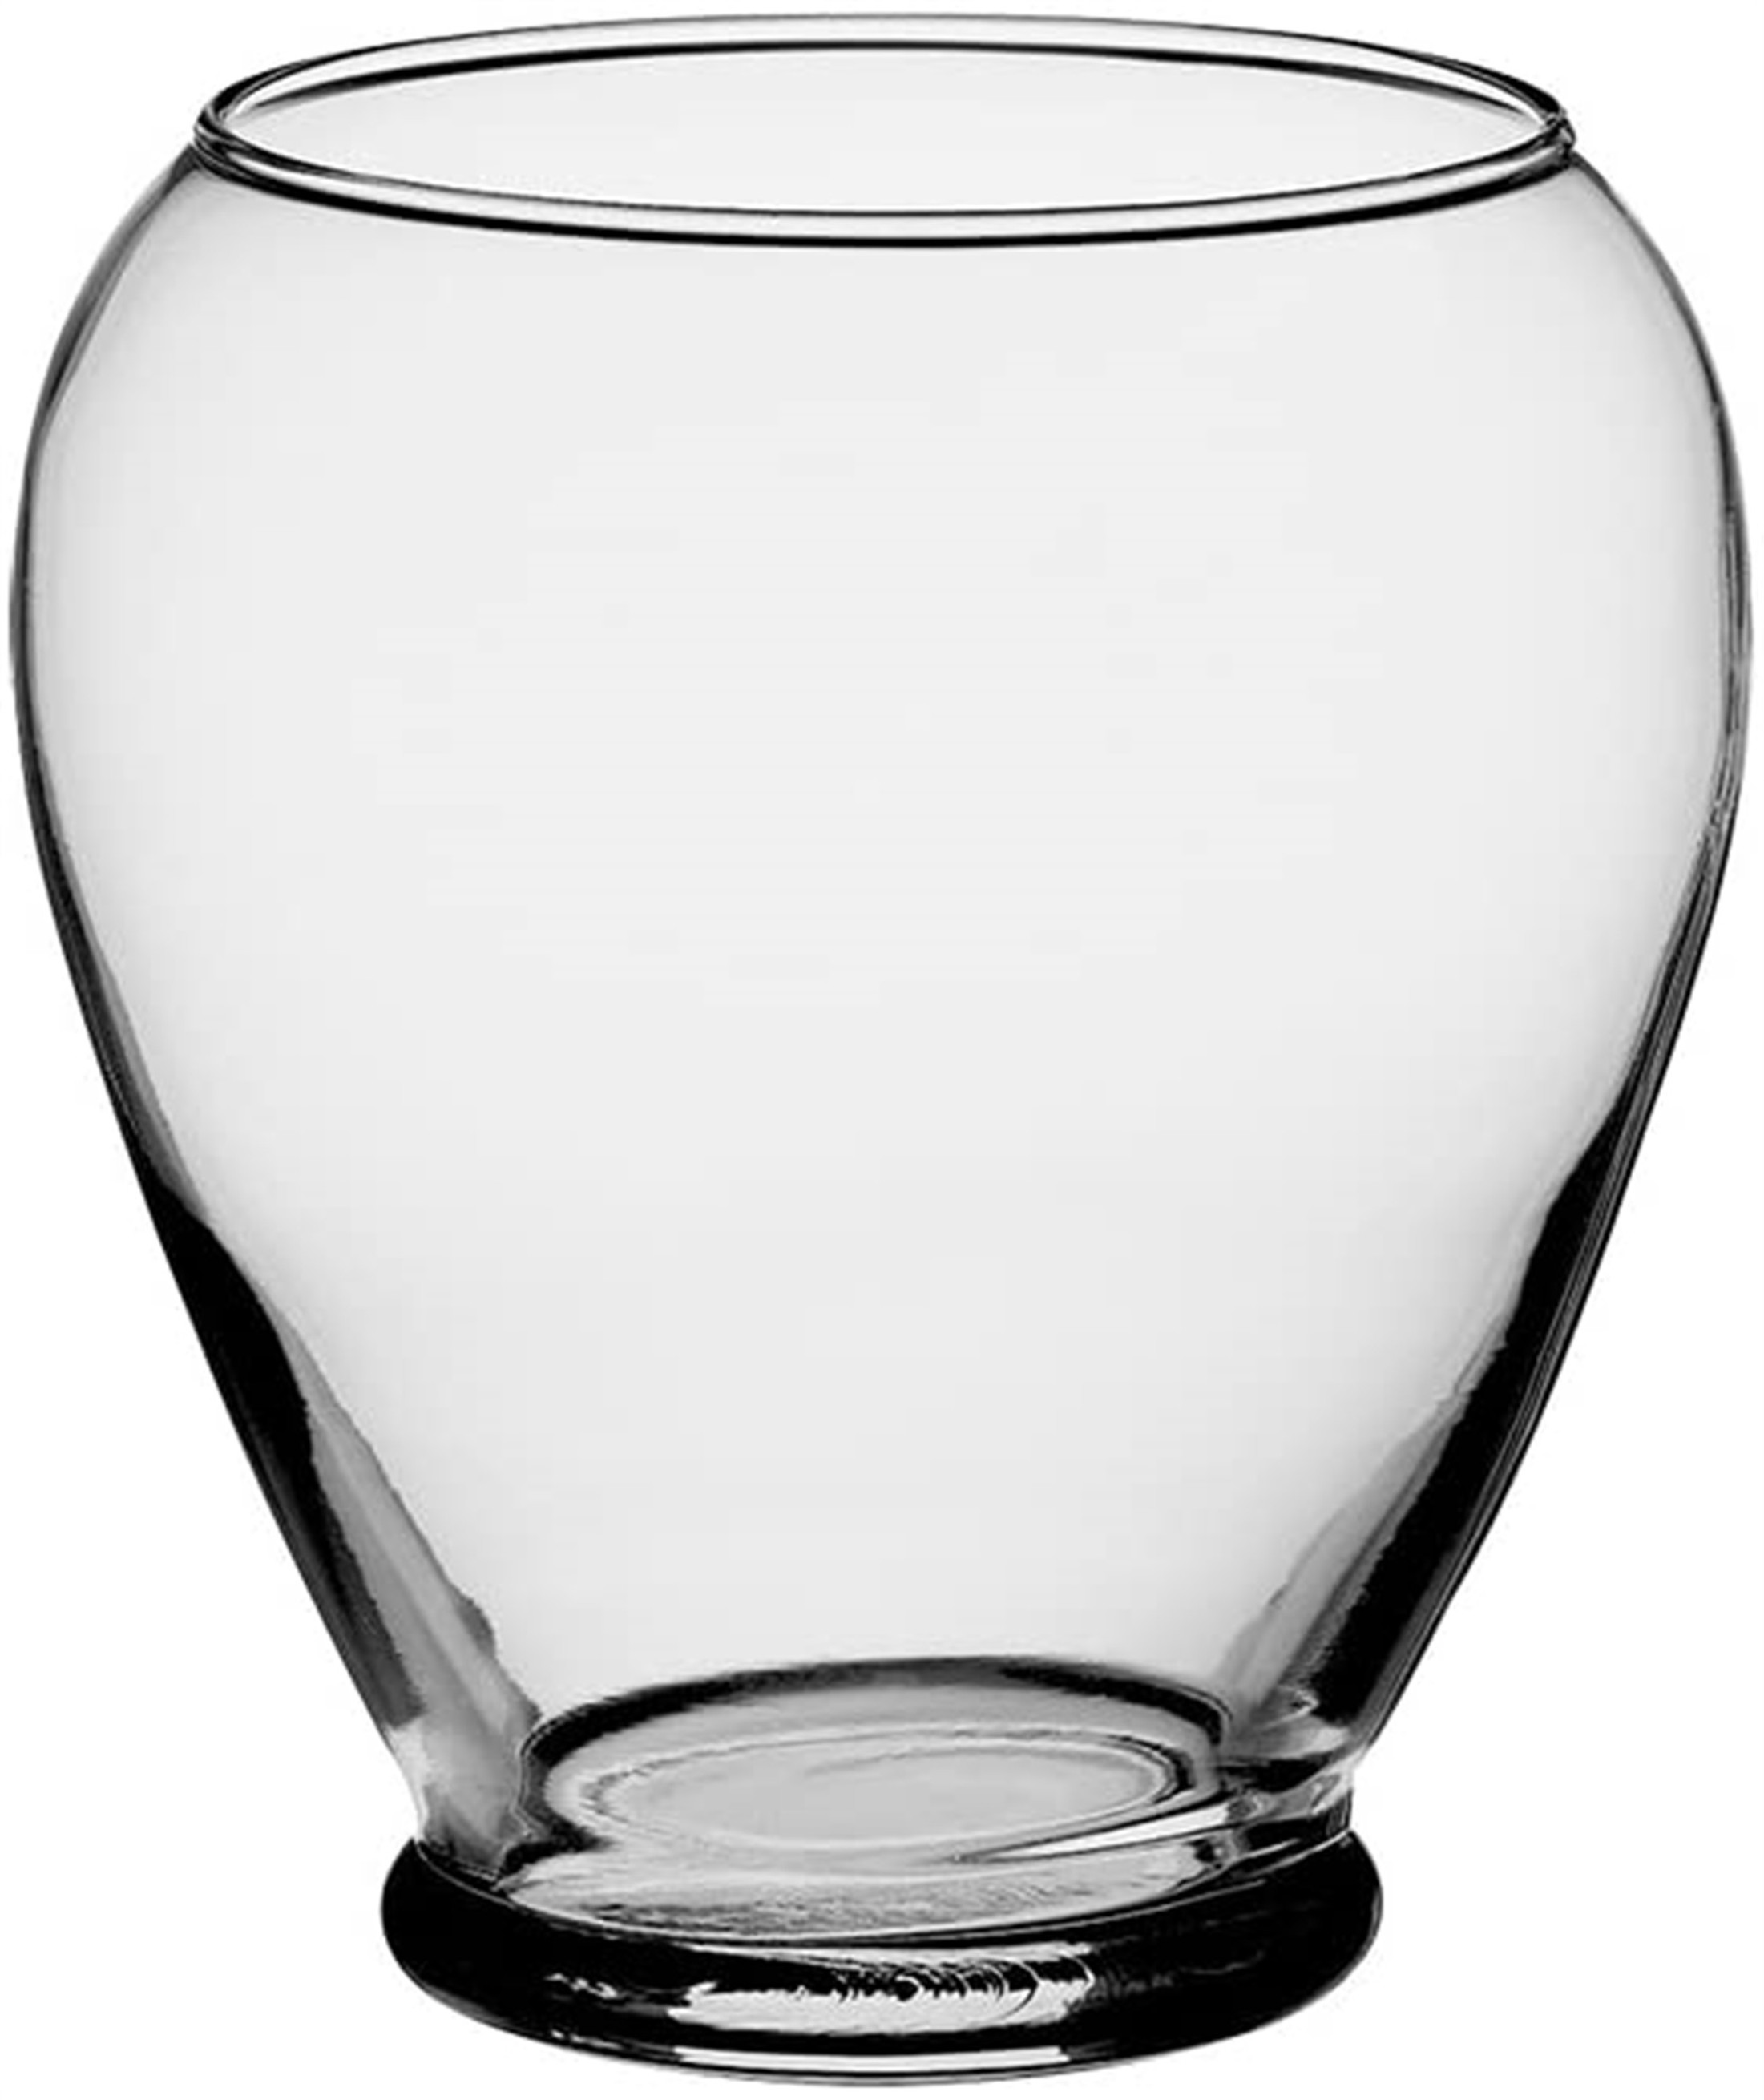 Syndicate Home & Garden (#4114-12-09TU) Serenity Vase, Clear - 5.75"